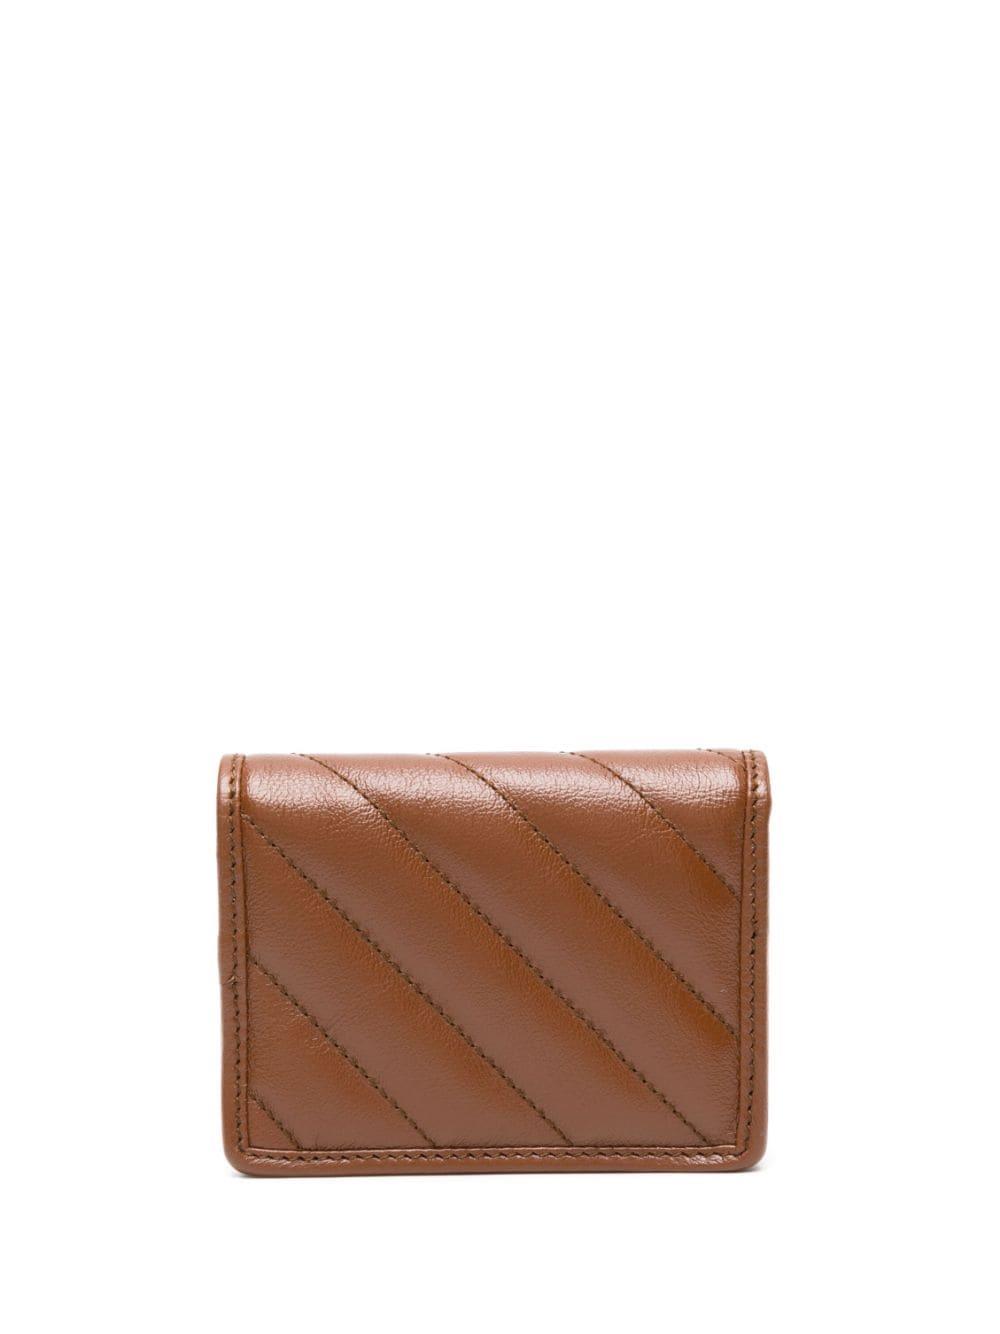 Gucci GG Marmont leather wallet - Brown